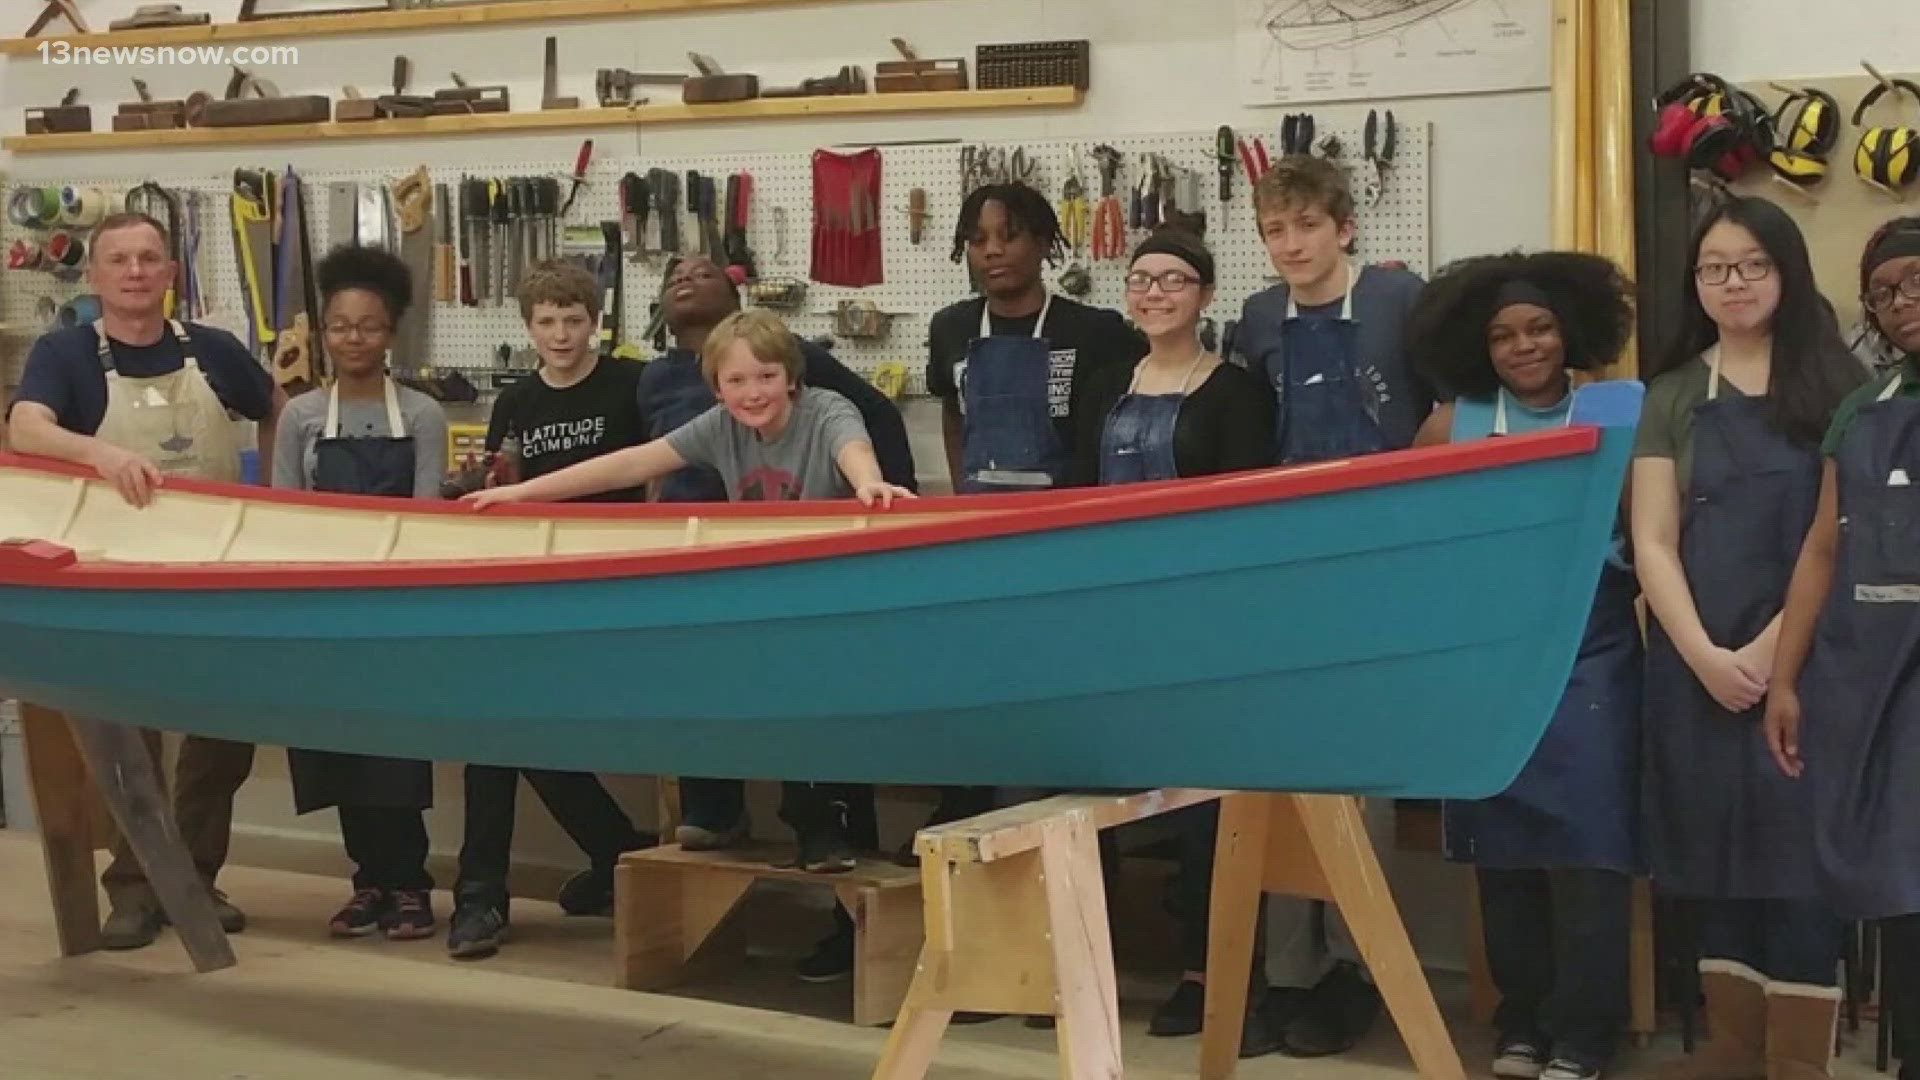 Today is Give Local 757 and one of the organizations participating is the Tidewater Wooden Boat Workshop. The boat-building program serves local kids.